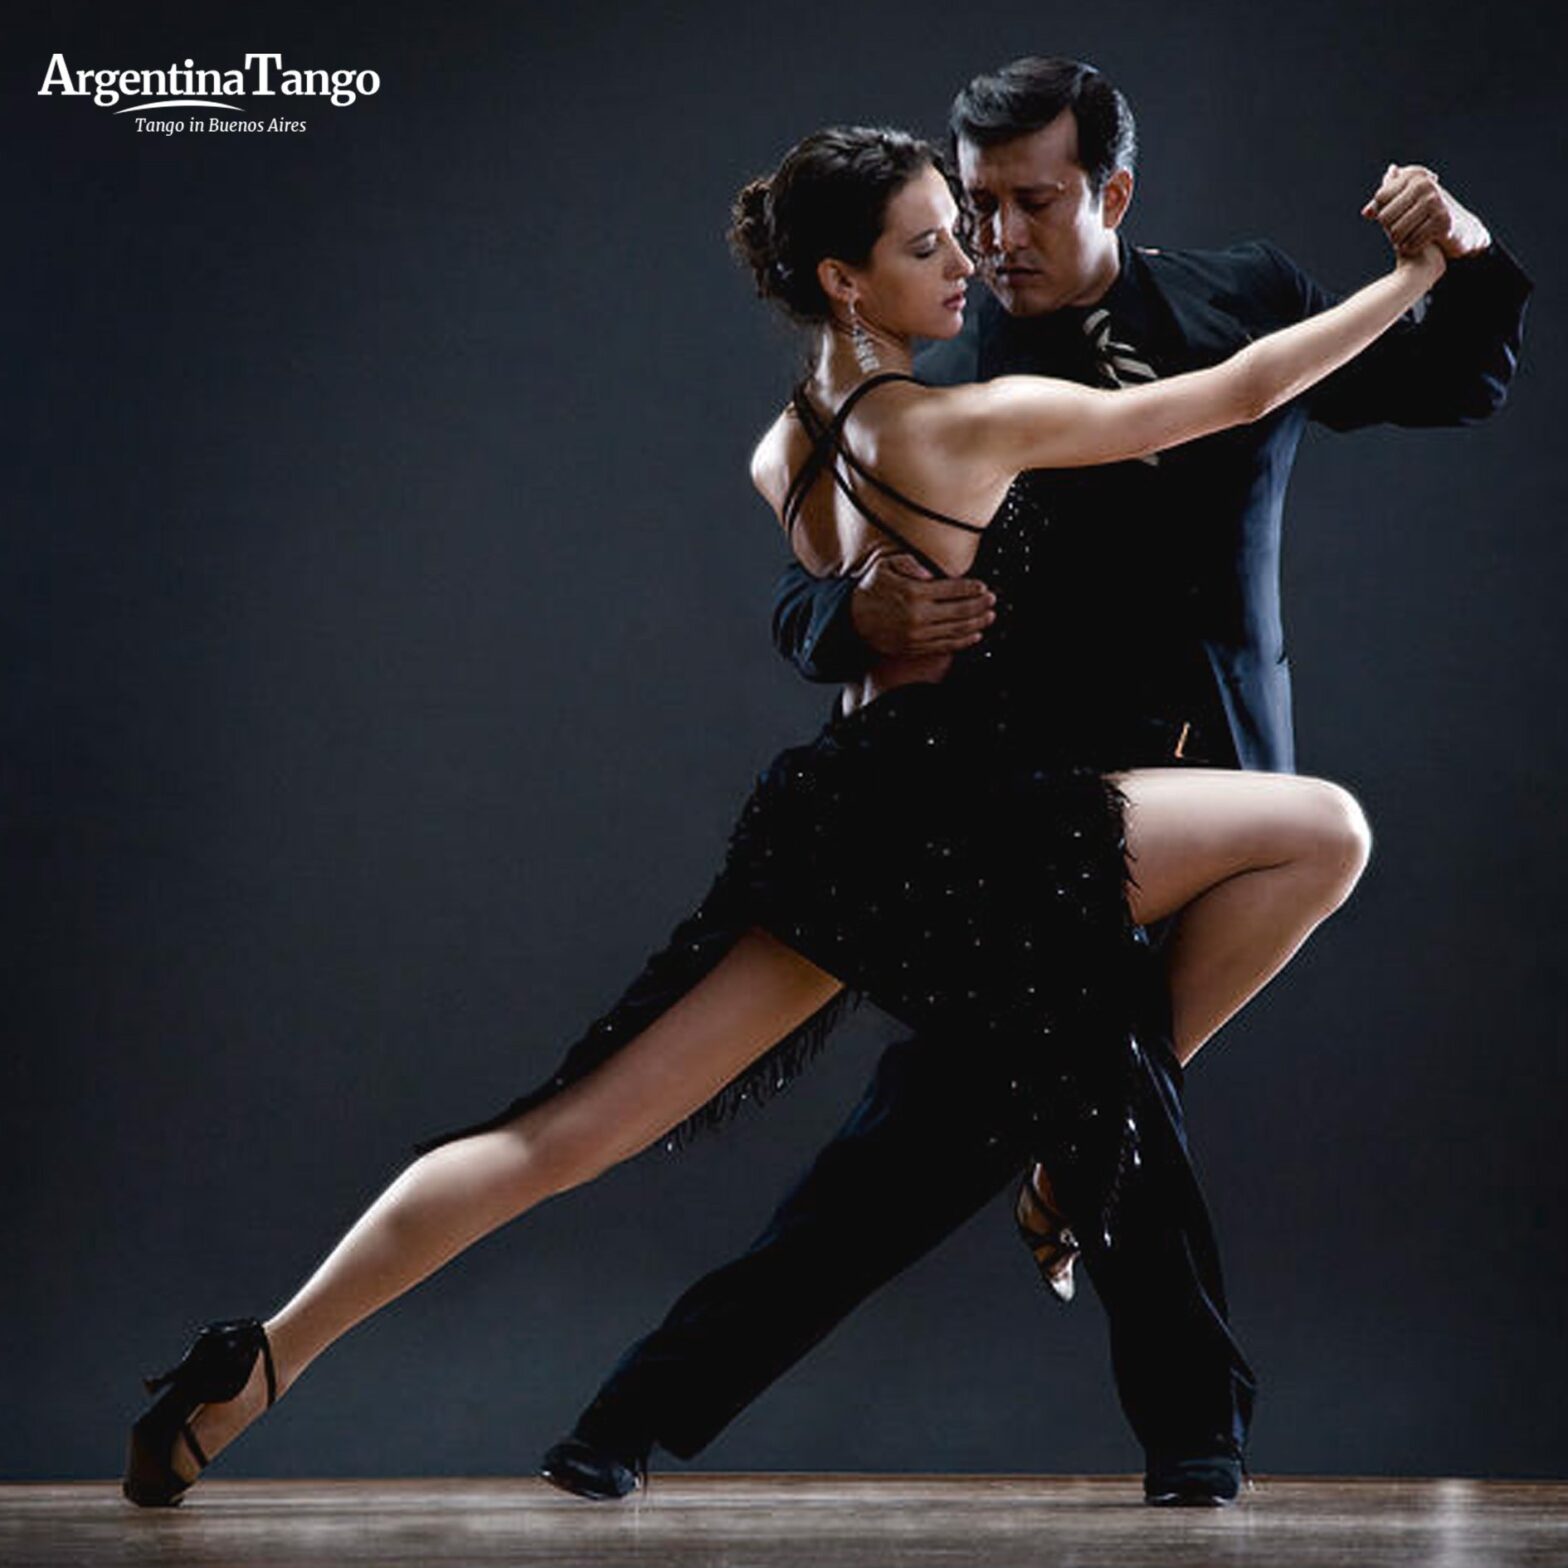 What type of music is used for Argentine tango?